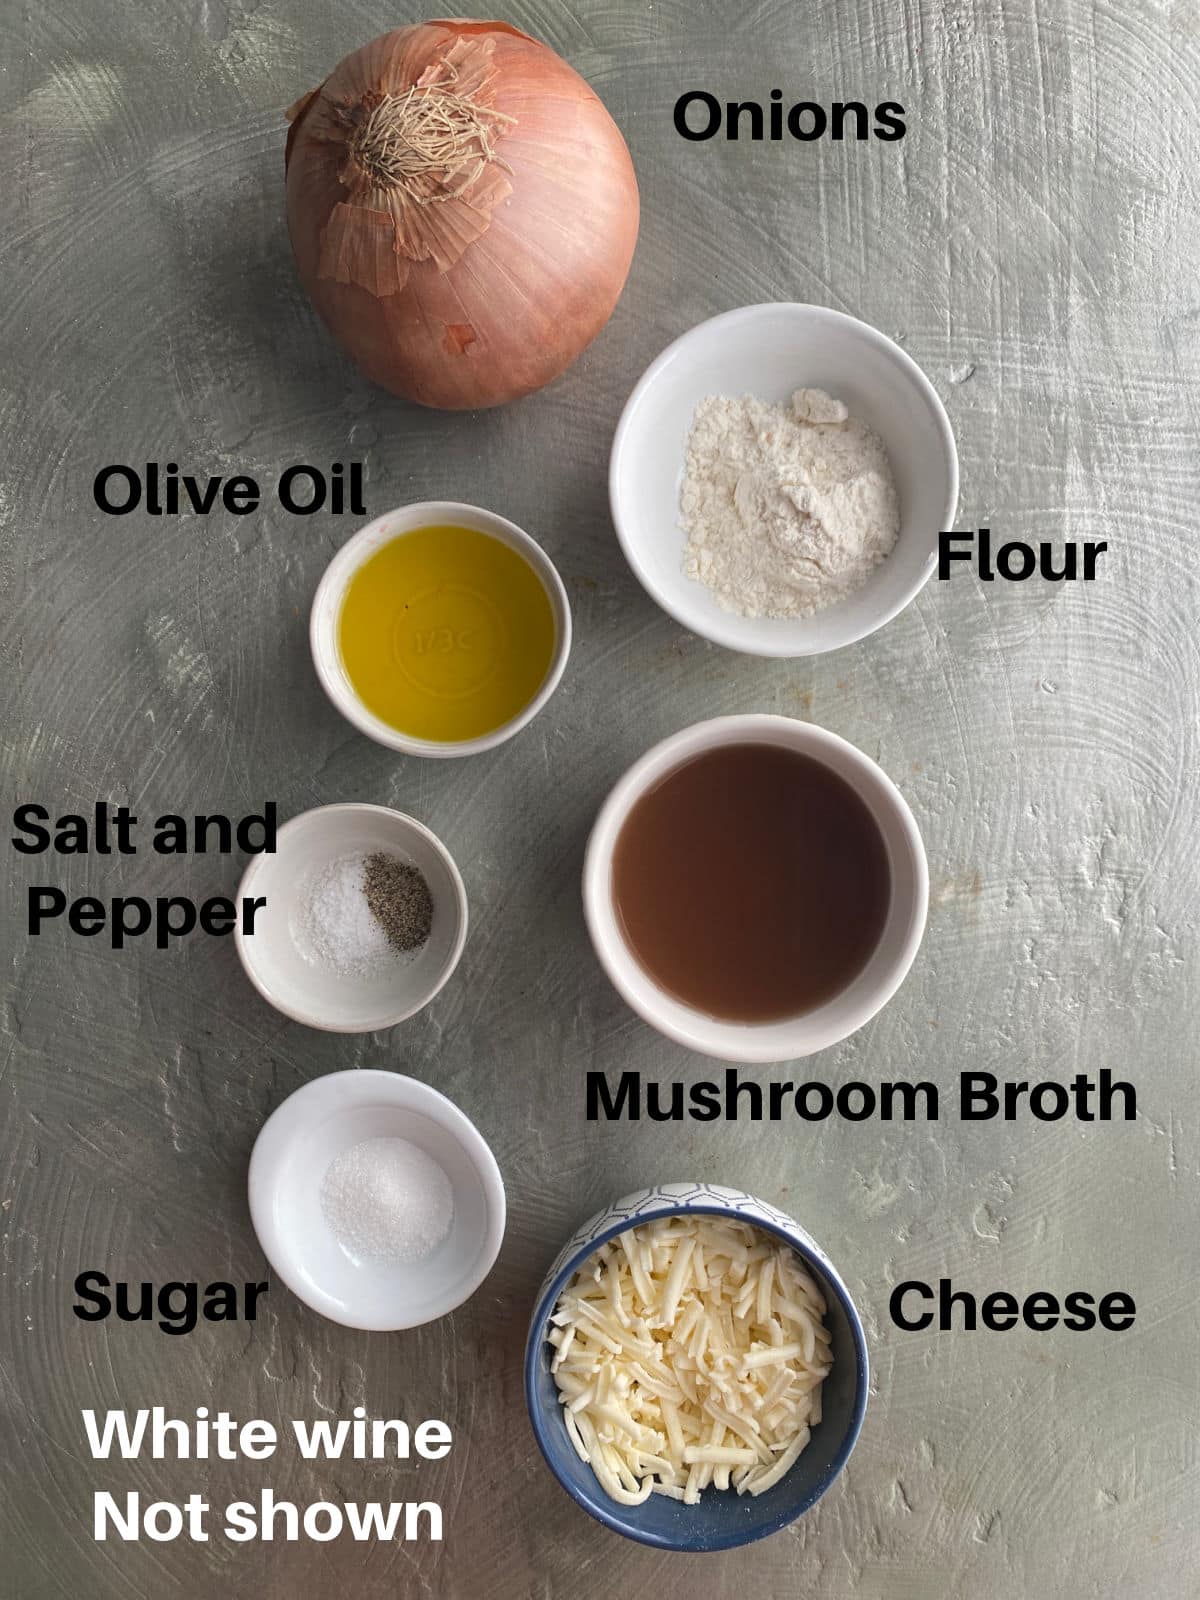 Ingredients for French Onion Soup Labeled